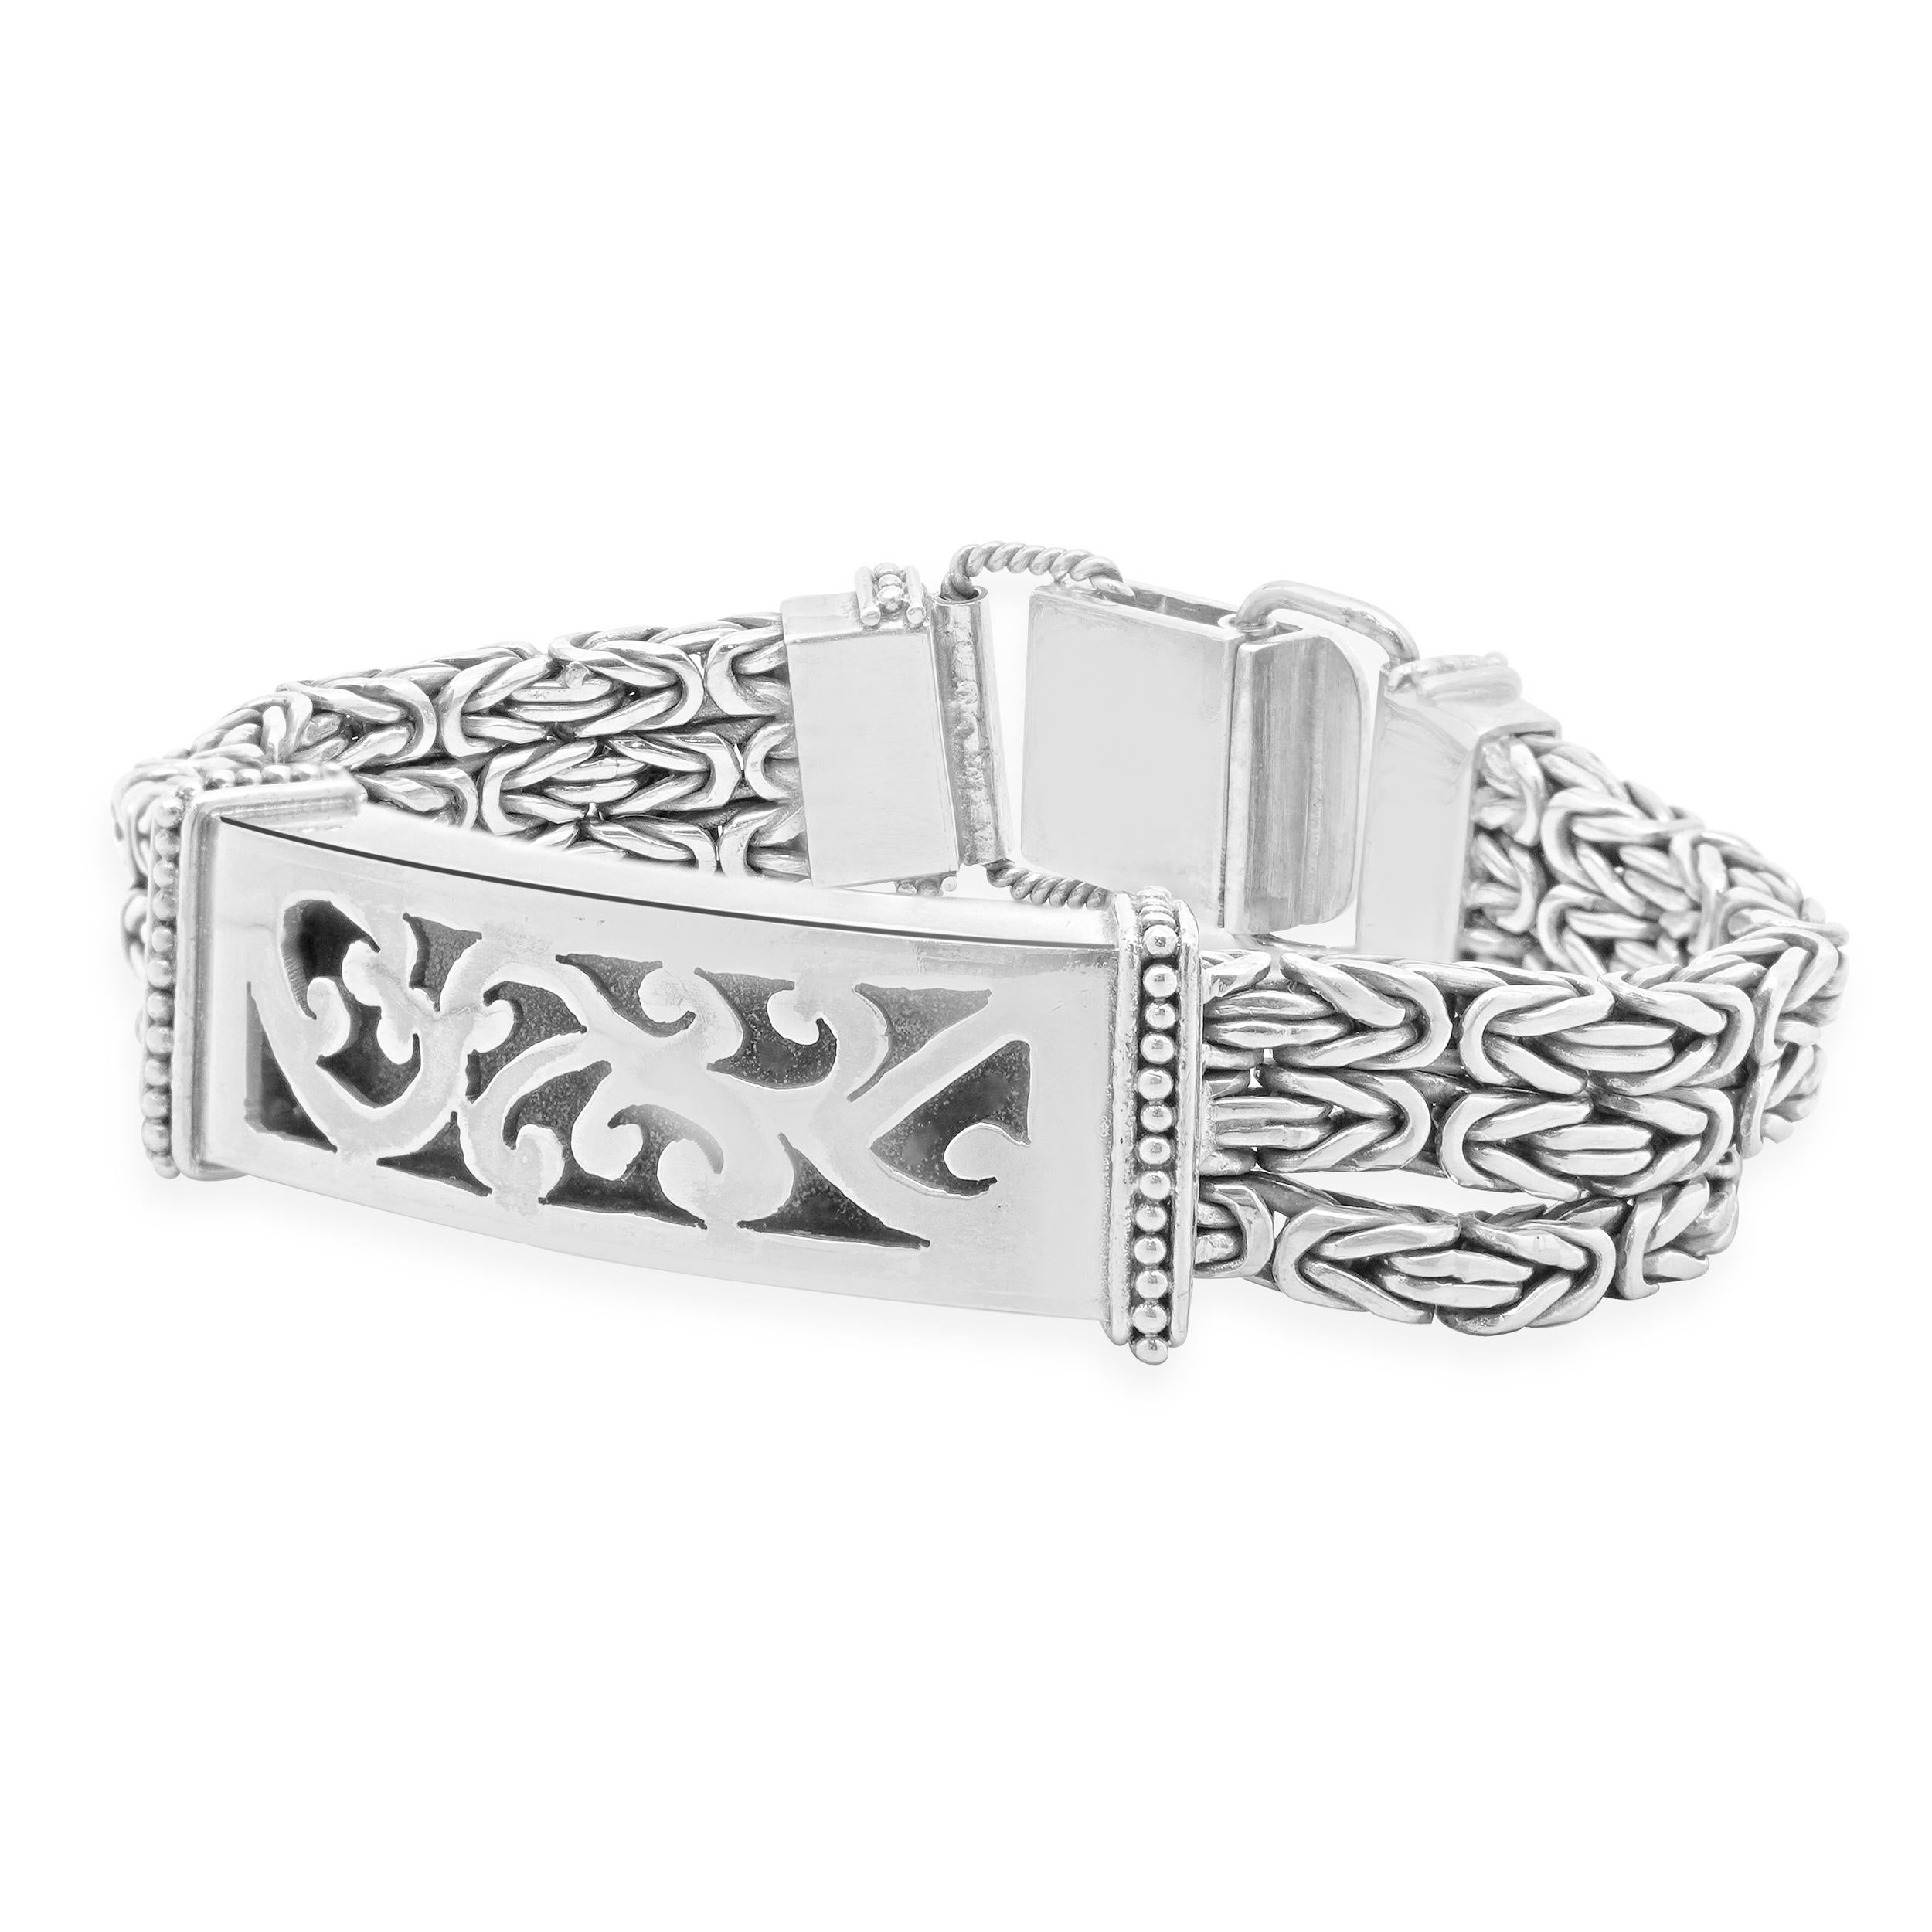 Designer: custom
Material: sterling silver
Dimensions: bracelet will fit up to a 6.75-inch wrist
Weight: 56.77 grams
